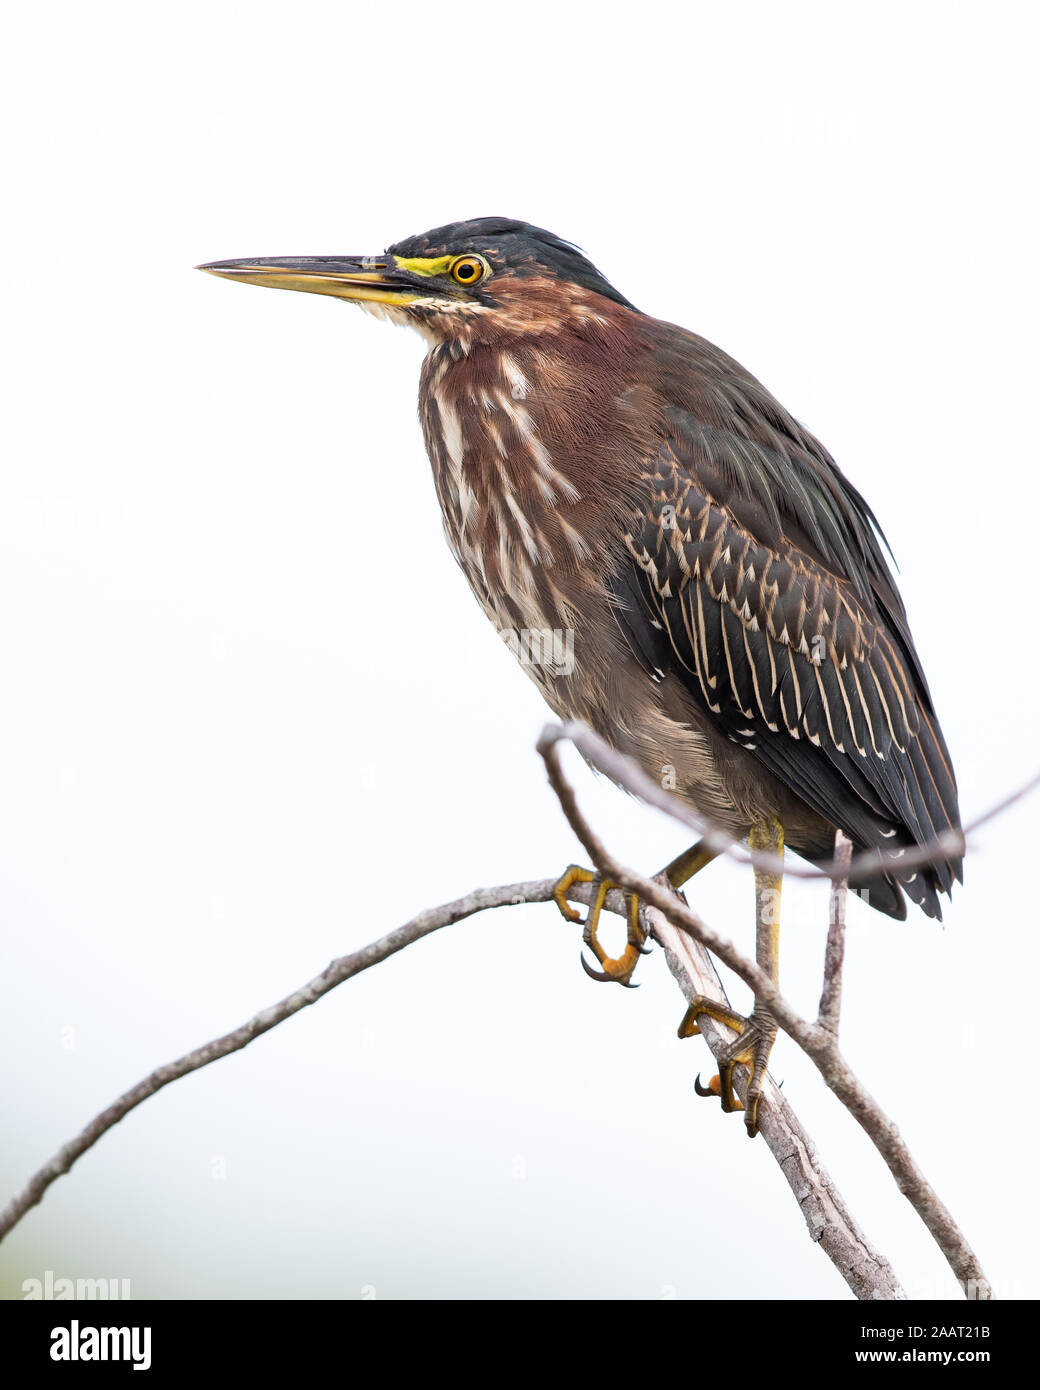 A green heron perched on a branch. Stock Photo